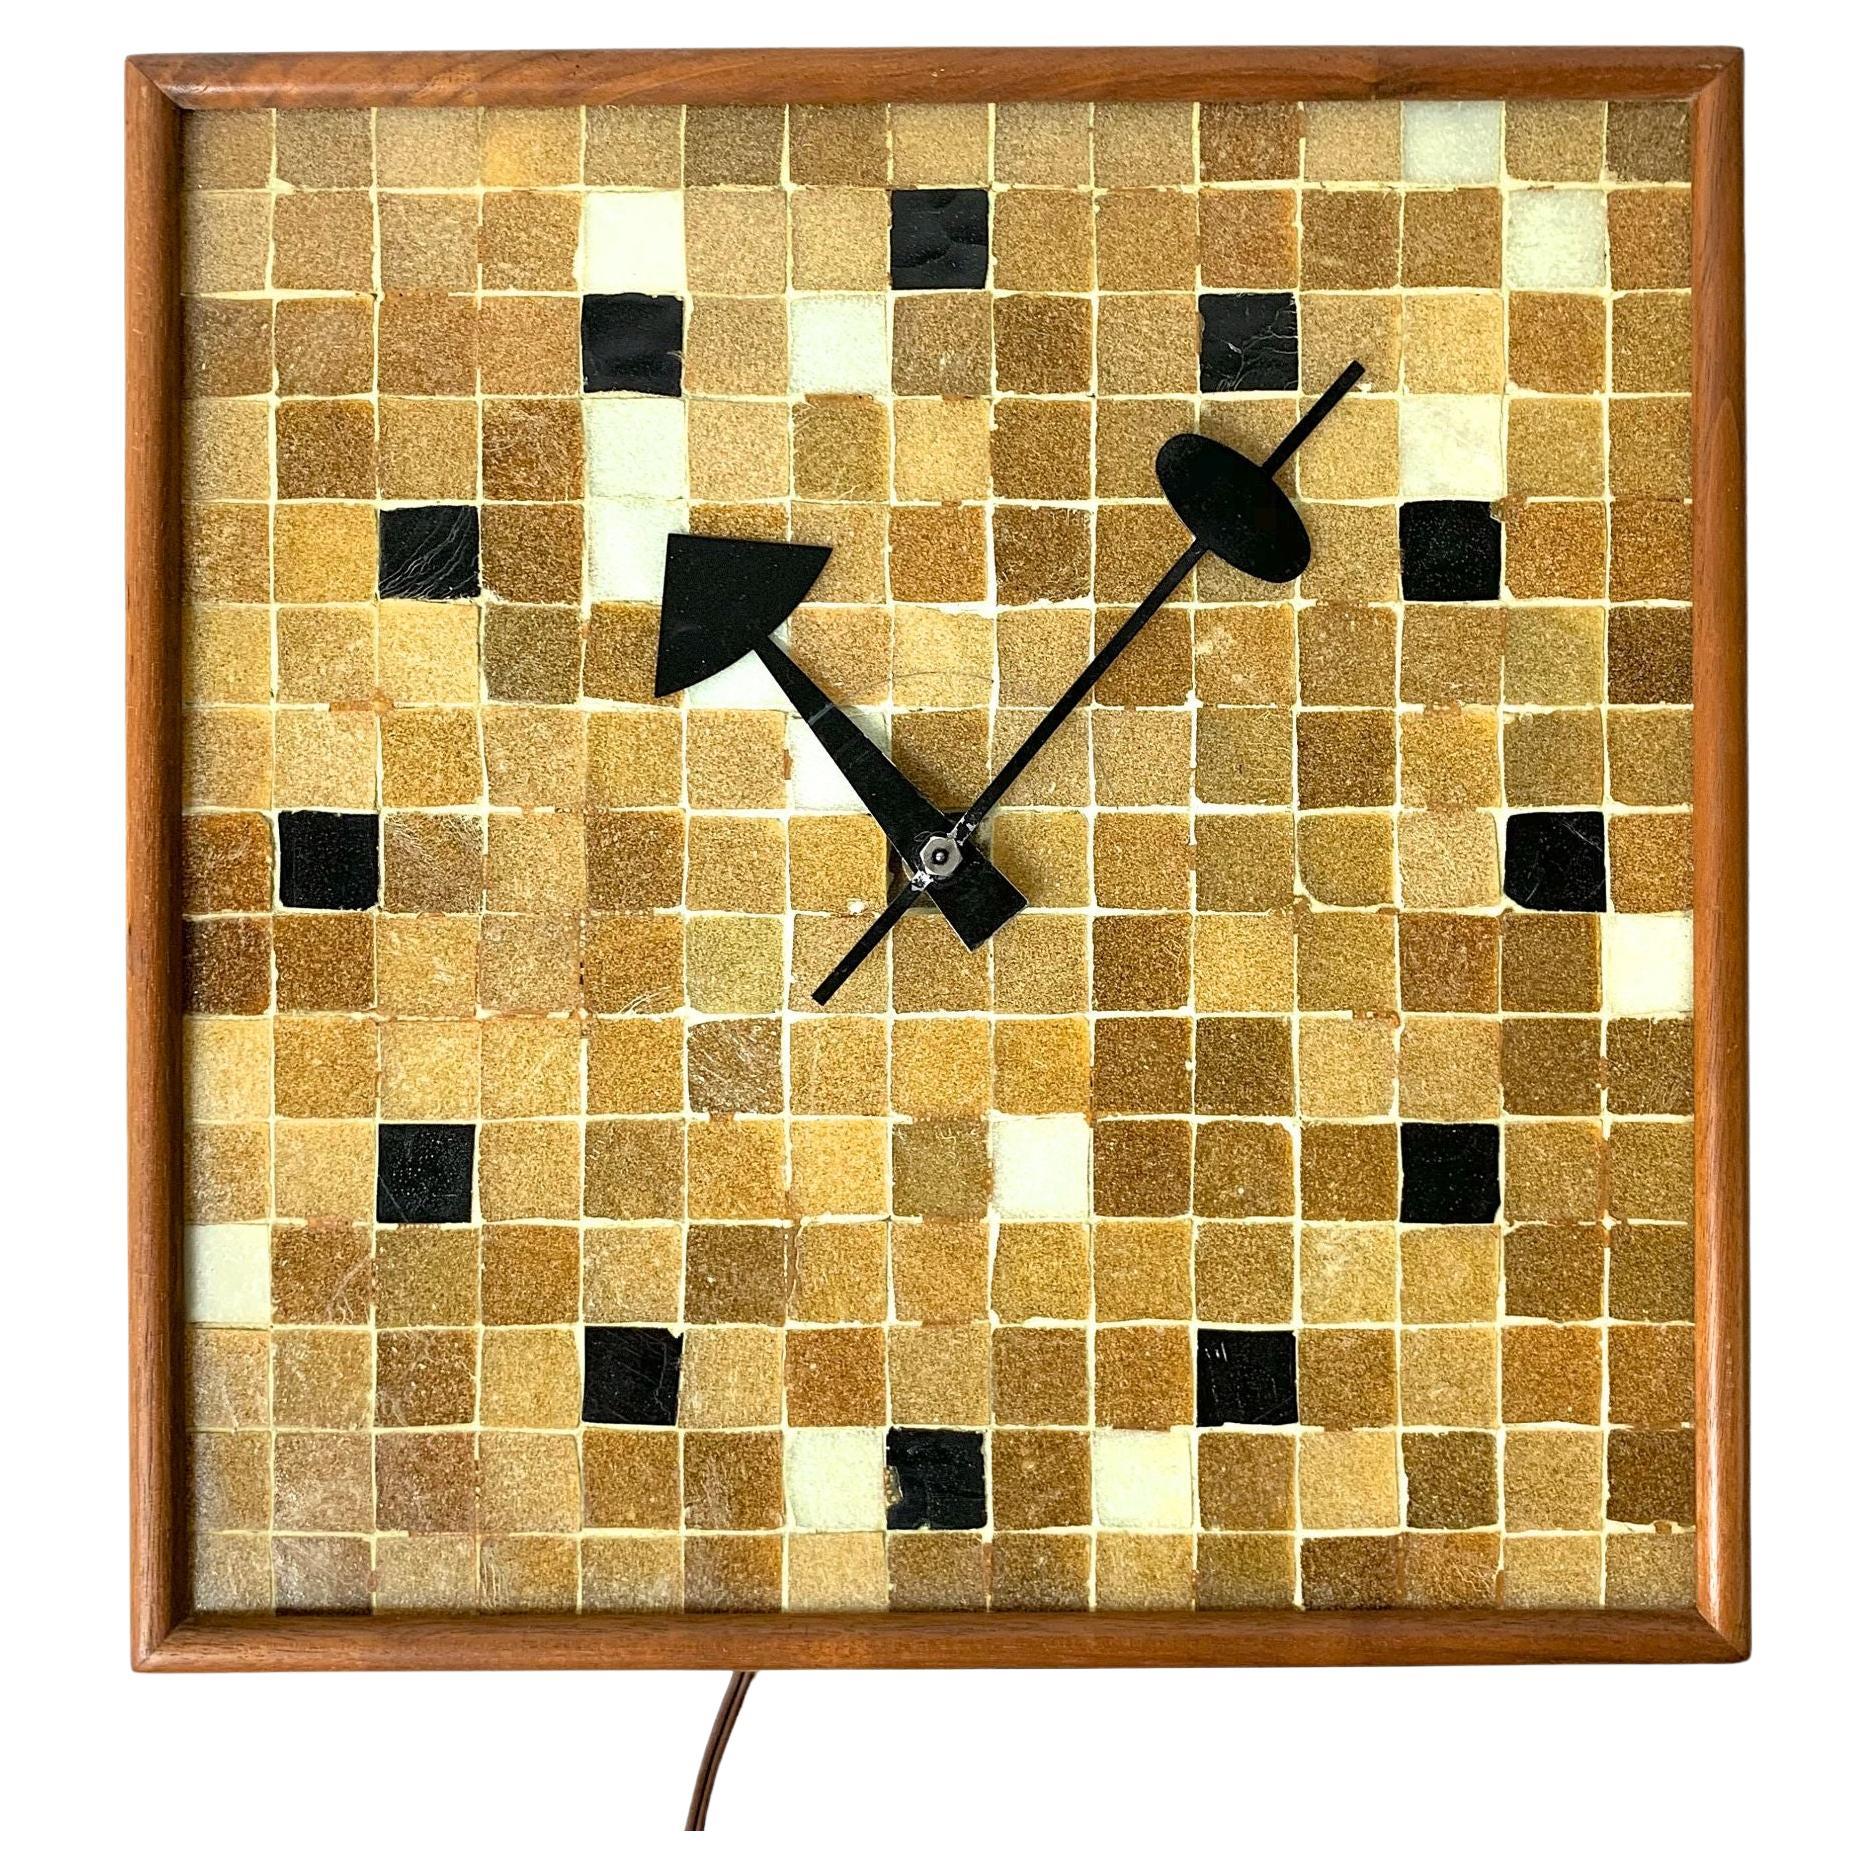 Rare Mosaic Tile Wall Clock in Walnut by George Nelson & Assoc circa 1950s